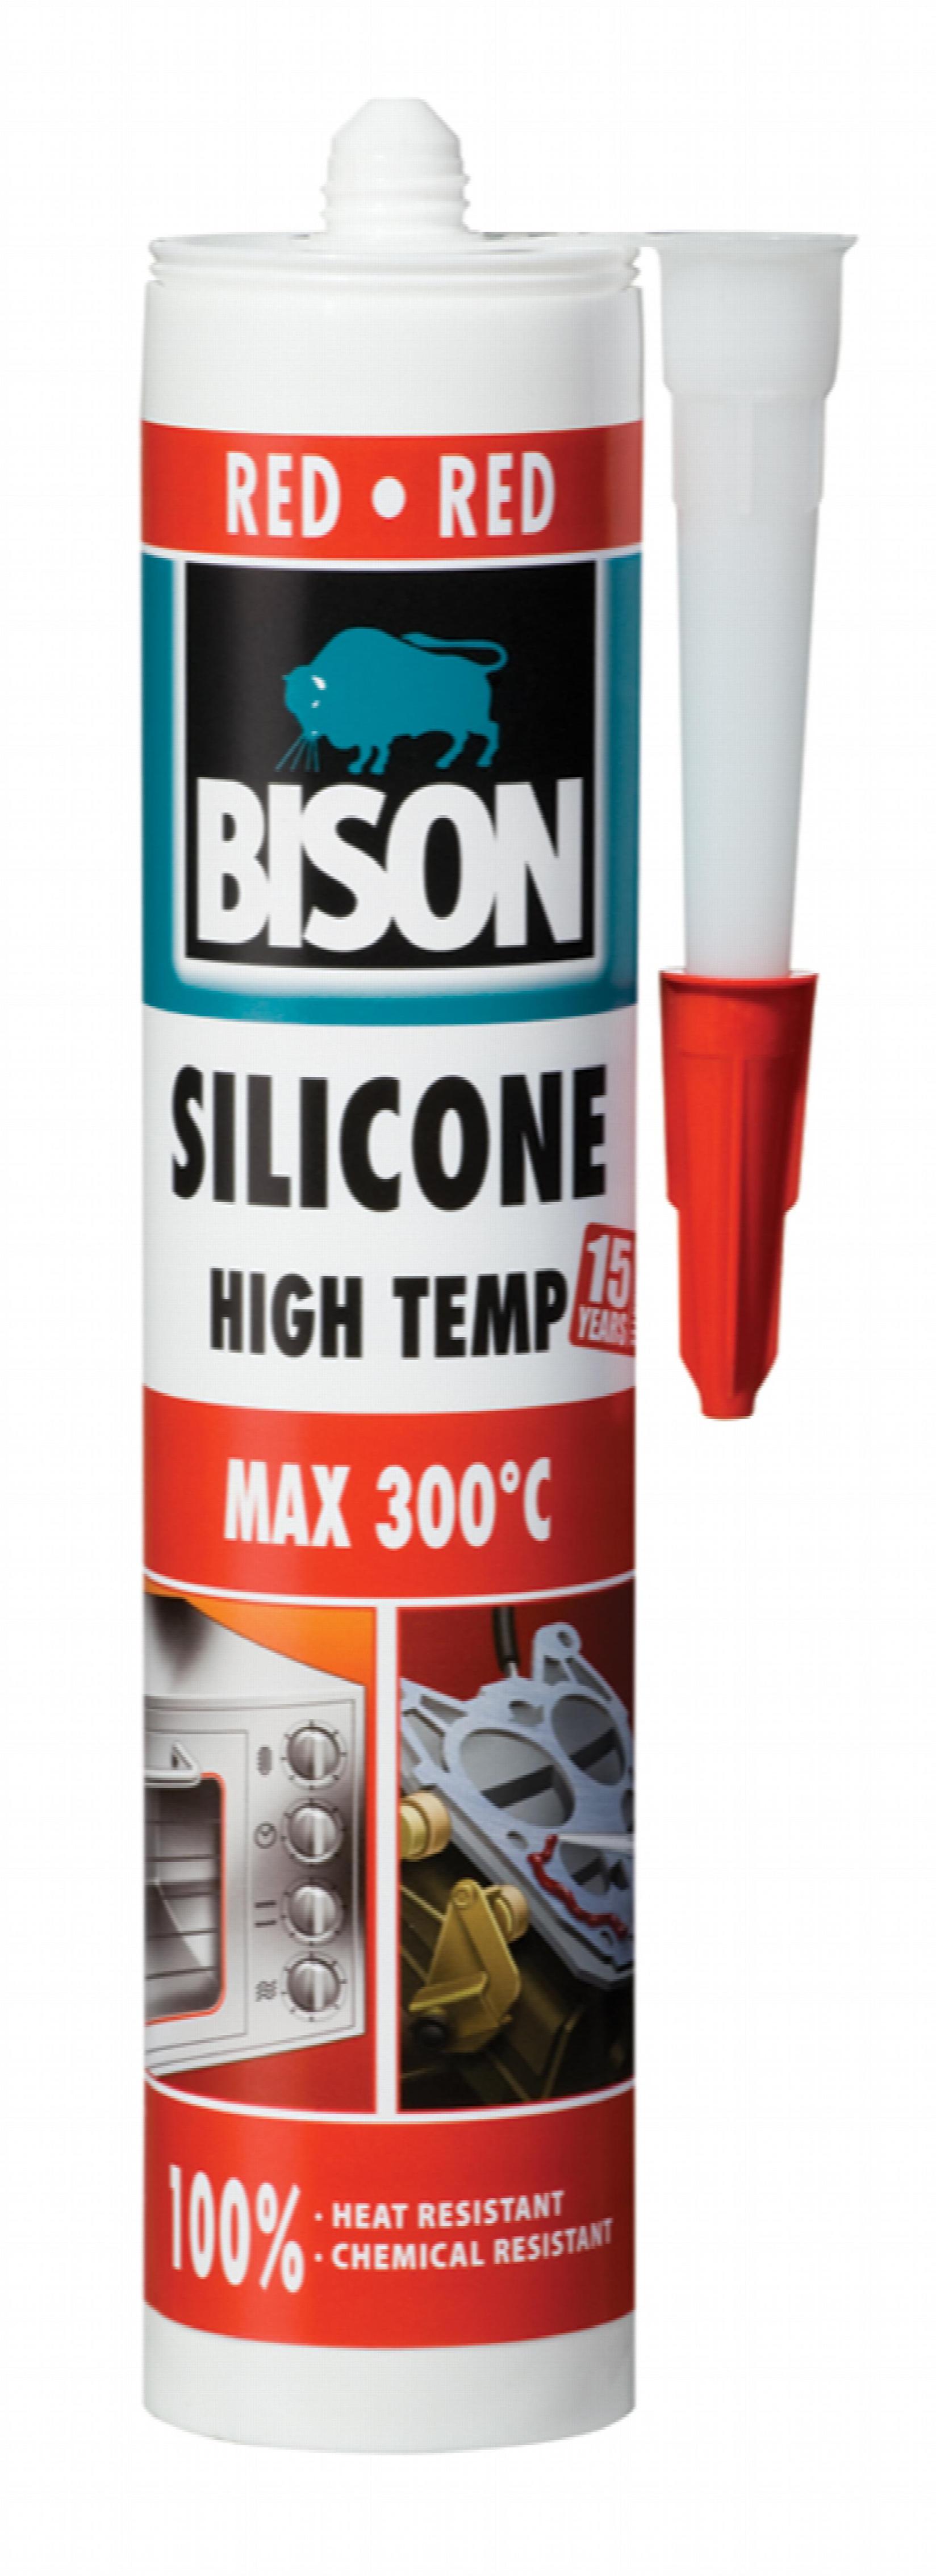 Selected image for BISON Silikon Silicone High Temperature Red 280 ml 144245